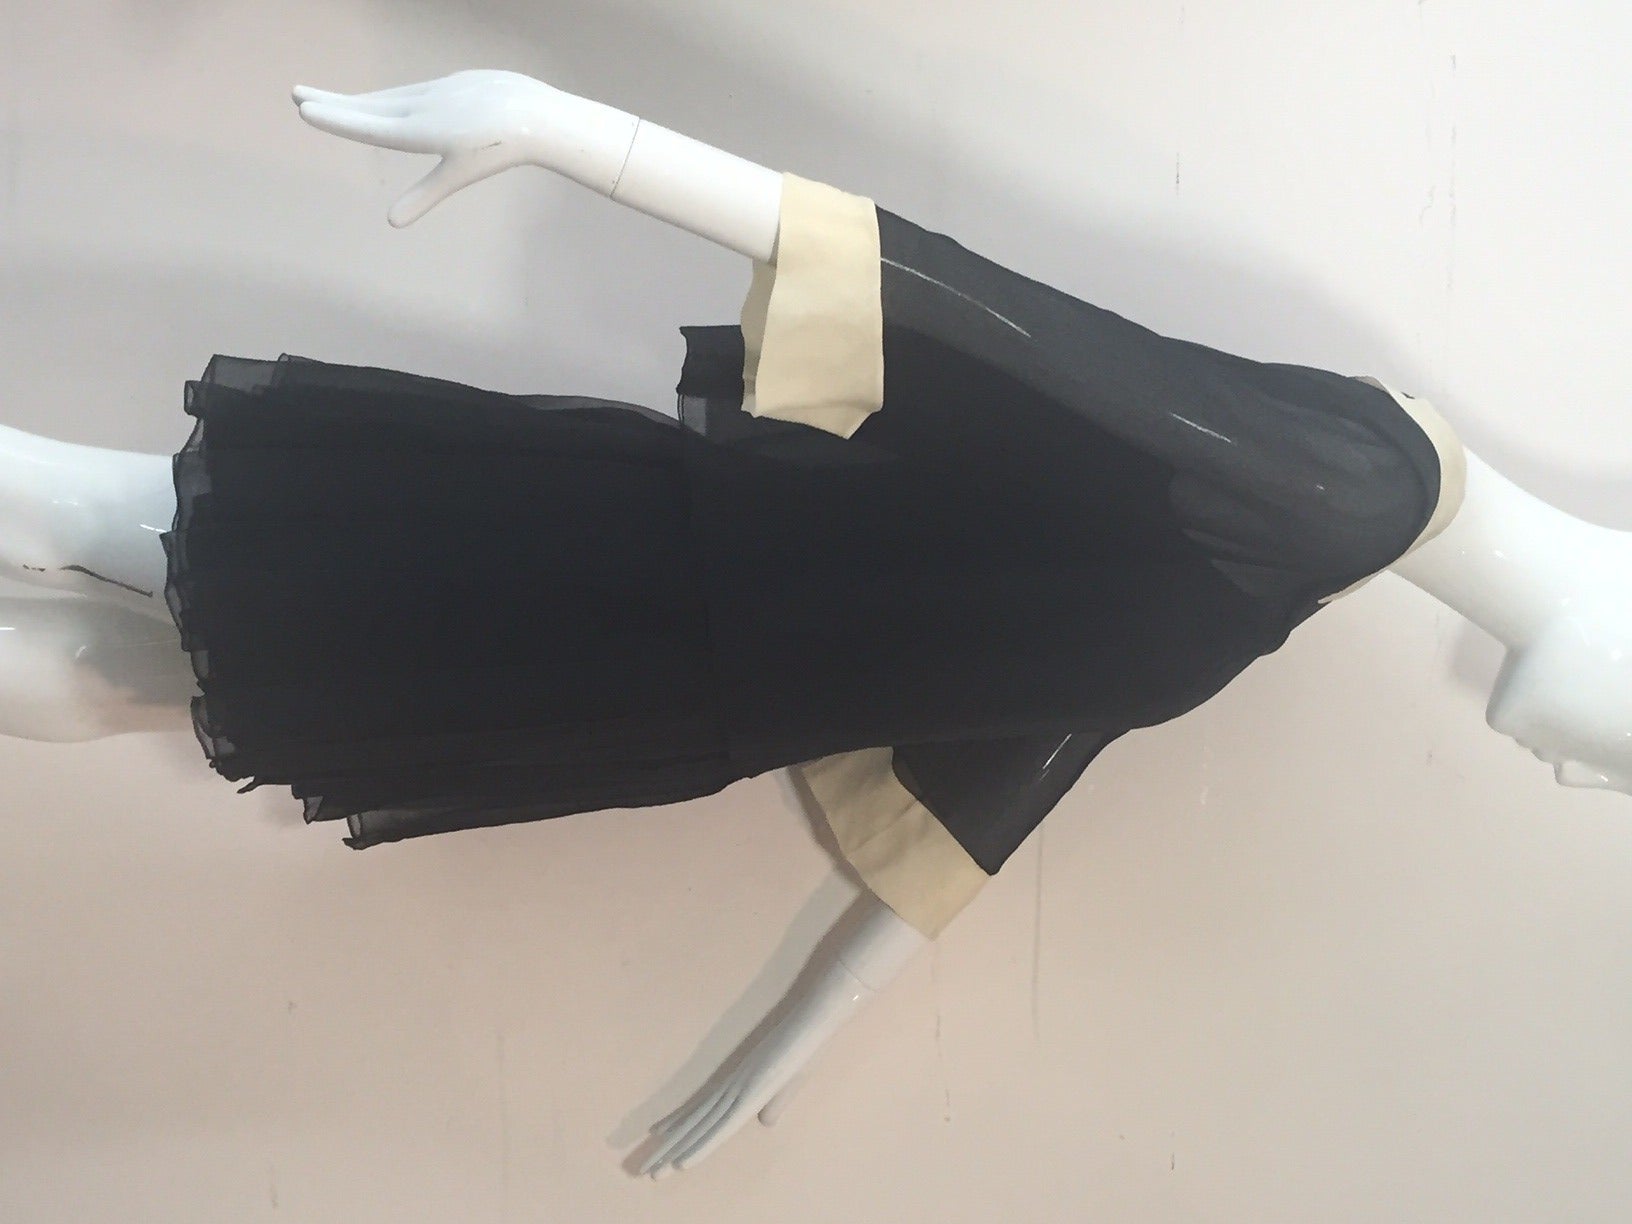 A super-cute 1960s James Galanos 2-piece black silk chiffon mini dress:  dress has spaghetti straps, boned structured bodice, heavily pleated, multiple layered, dropped waist skirt.  Chiffon overlay jacket buttons up the back and features bone